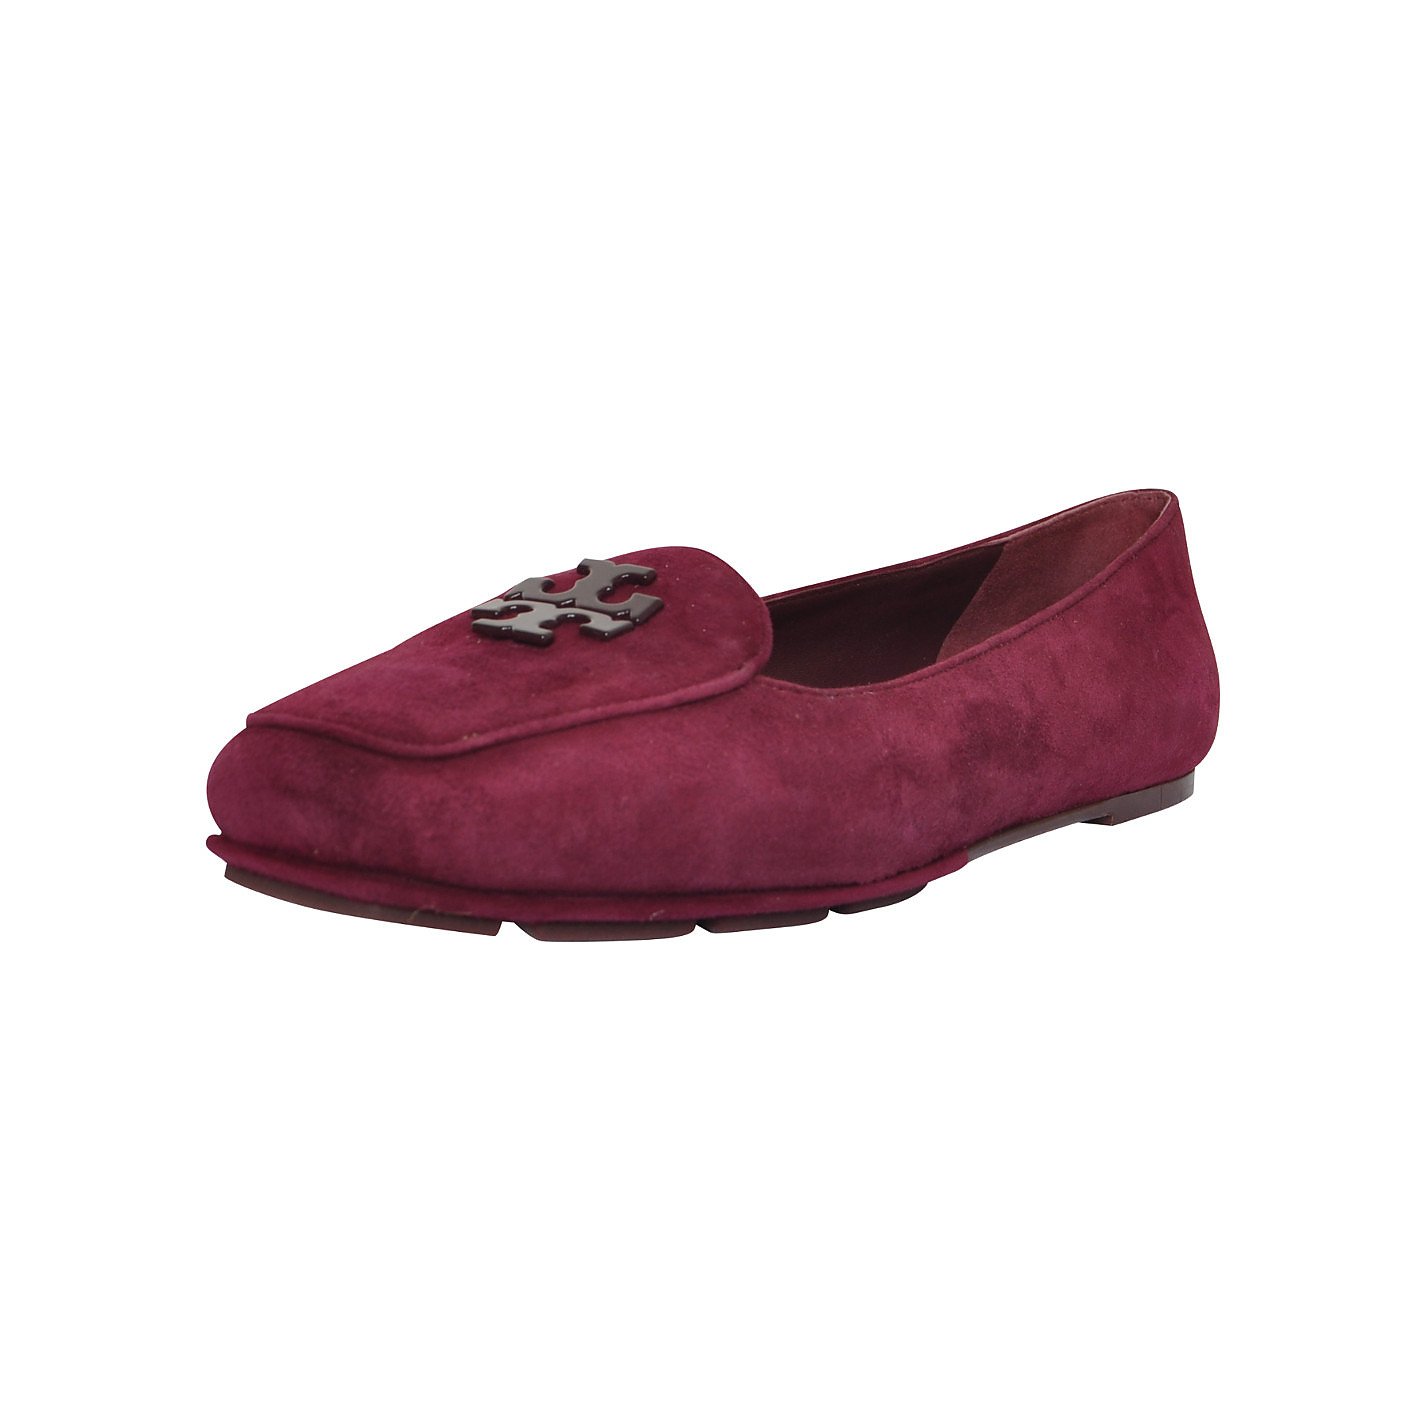 Tory Burch Suede Loafers